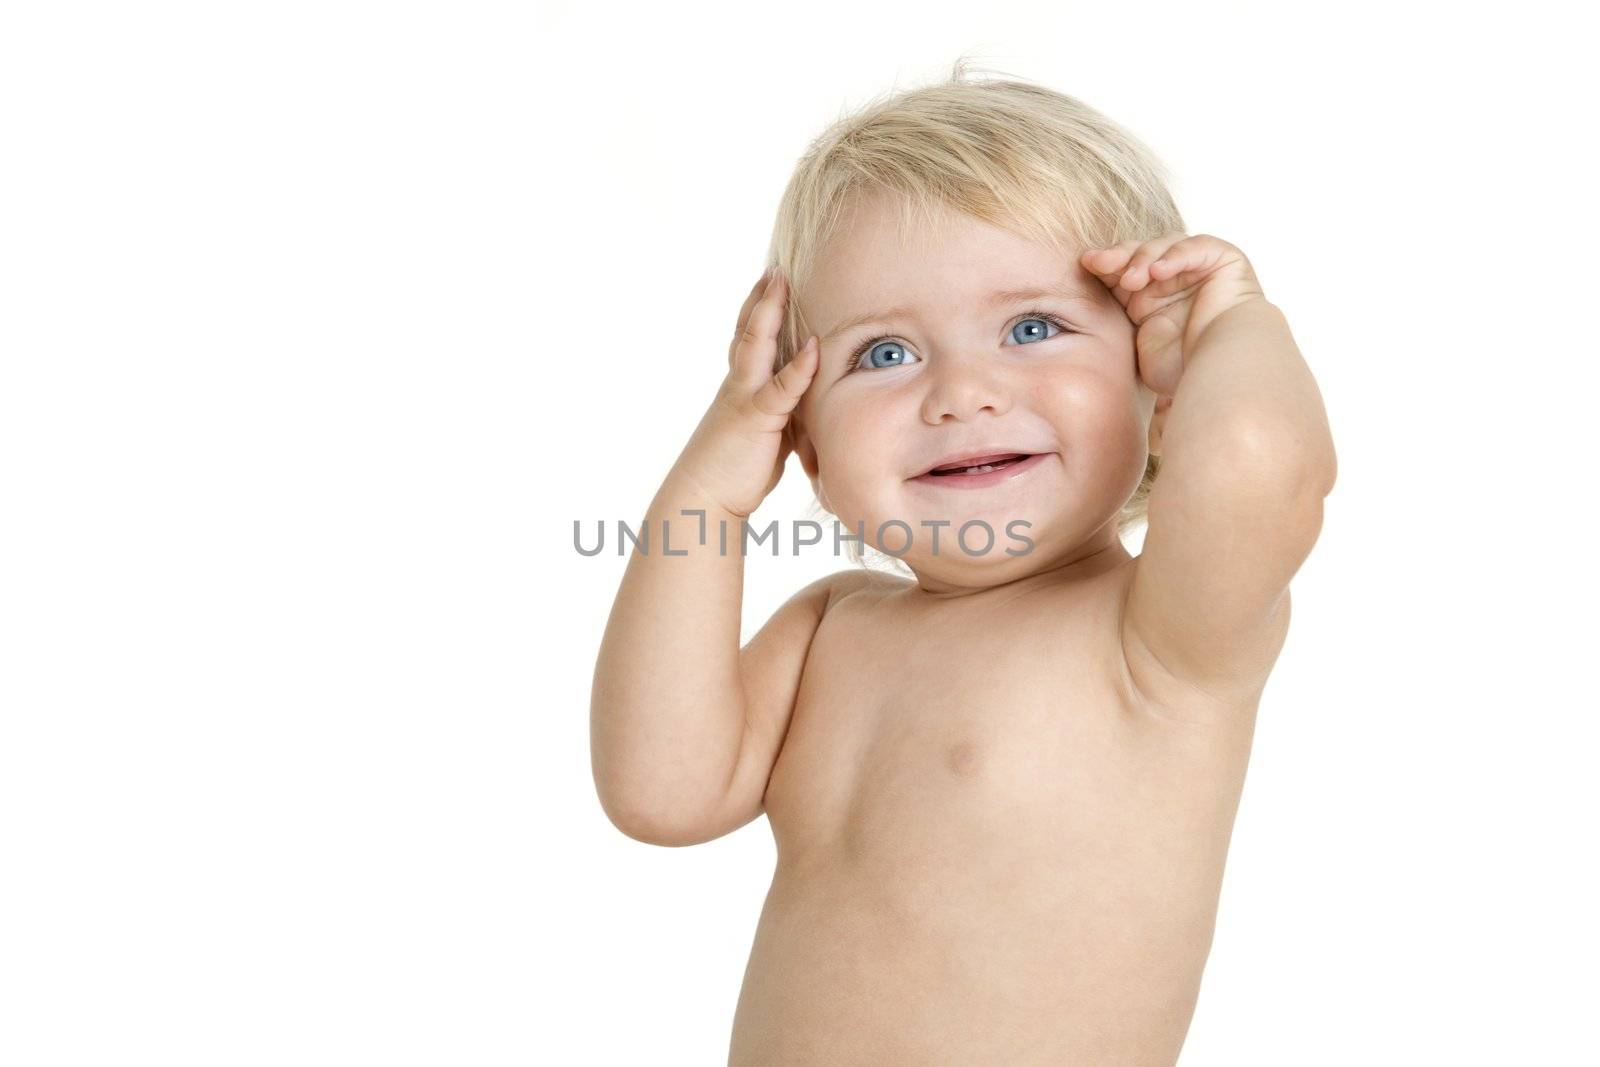 Blue eyed baby girl smiling with hands on her head. Isolated on white background.